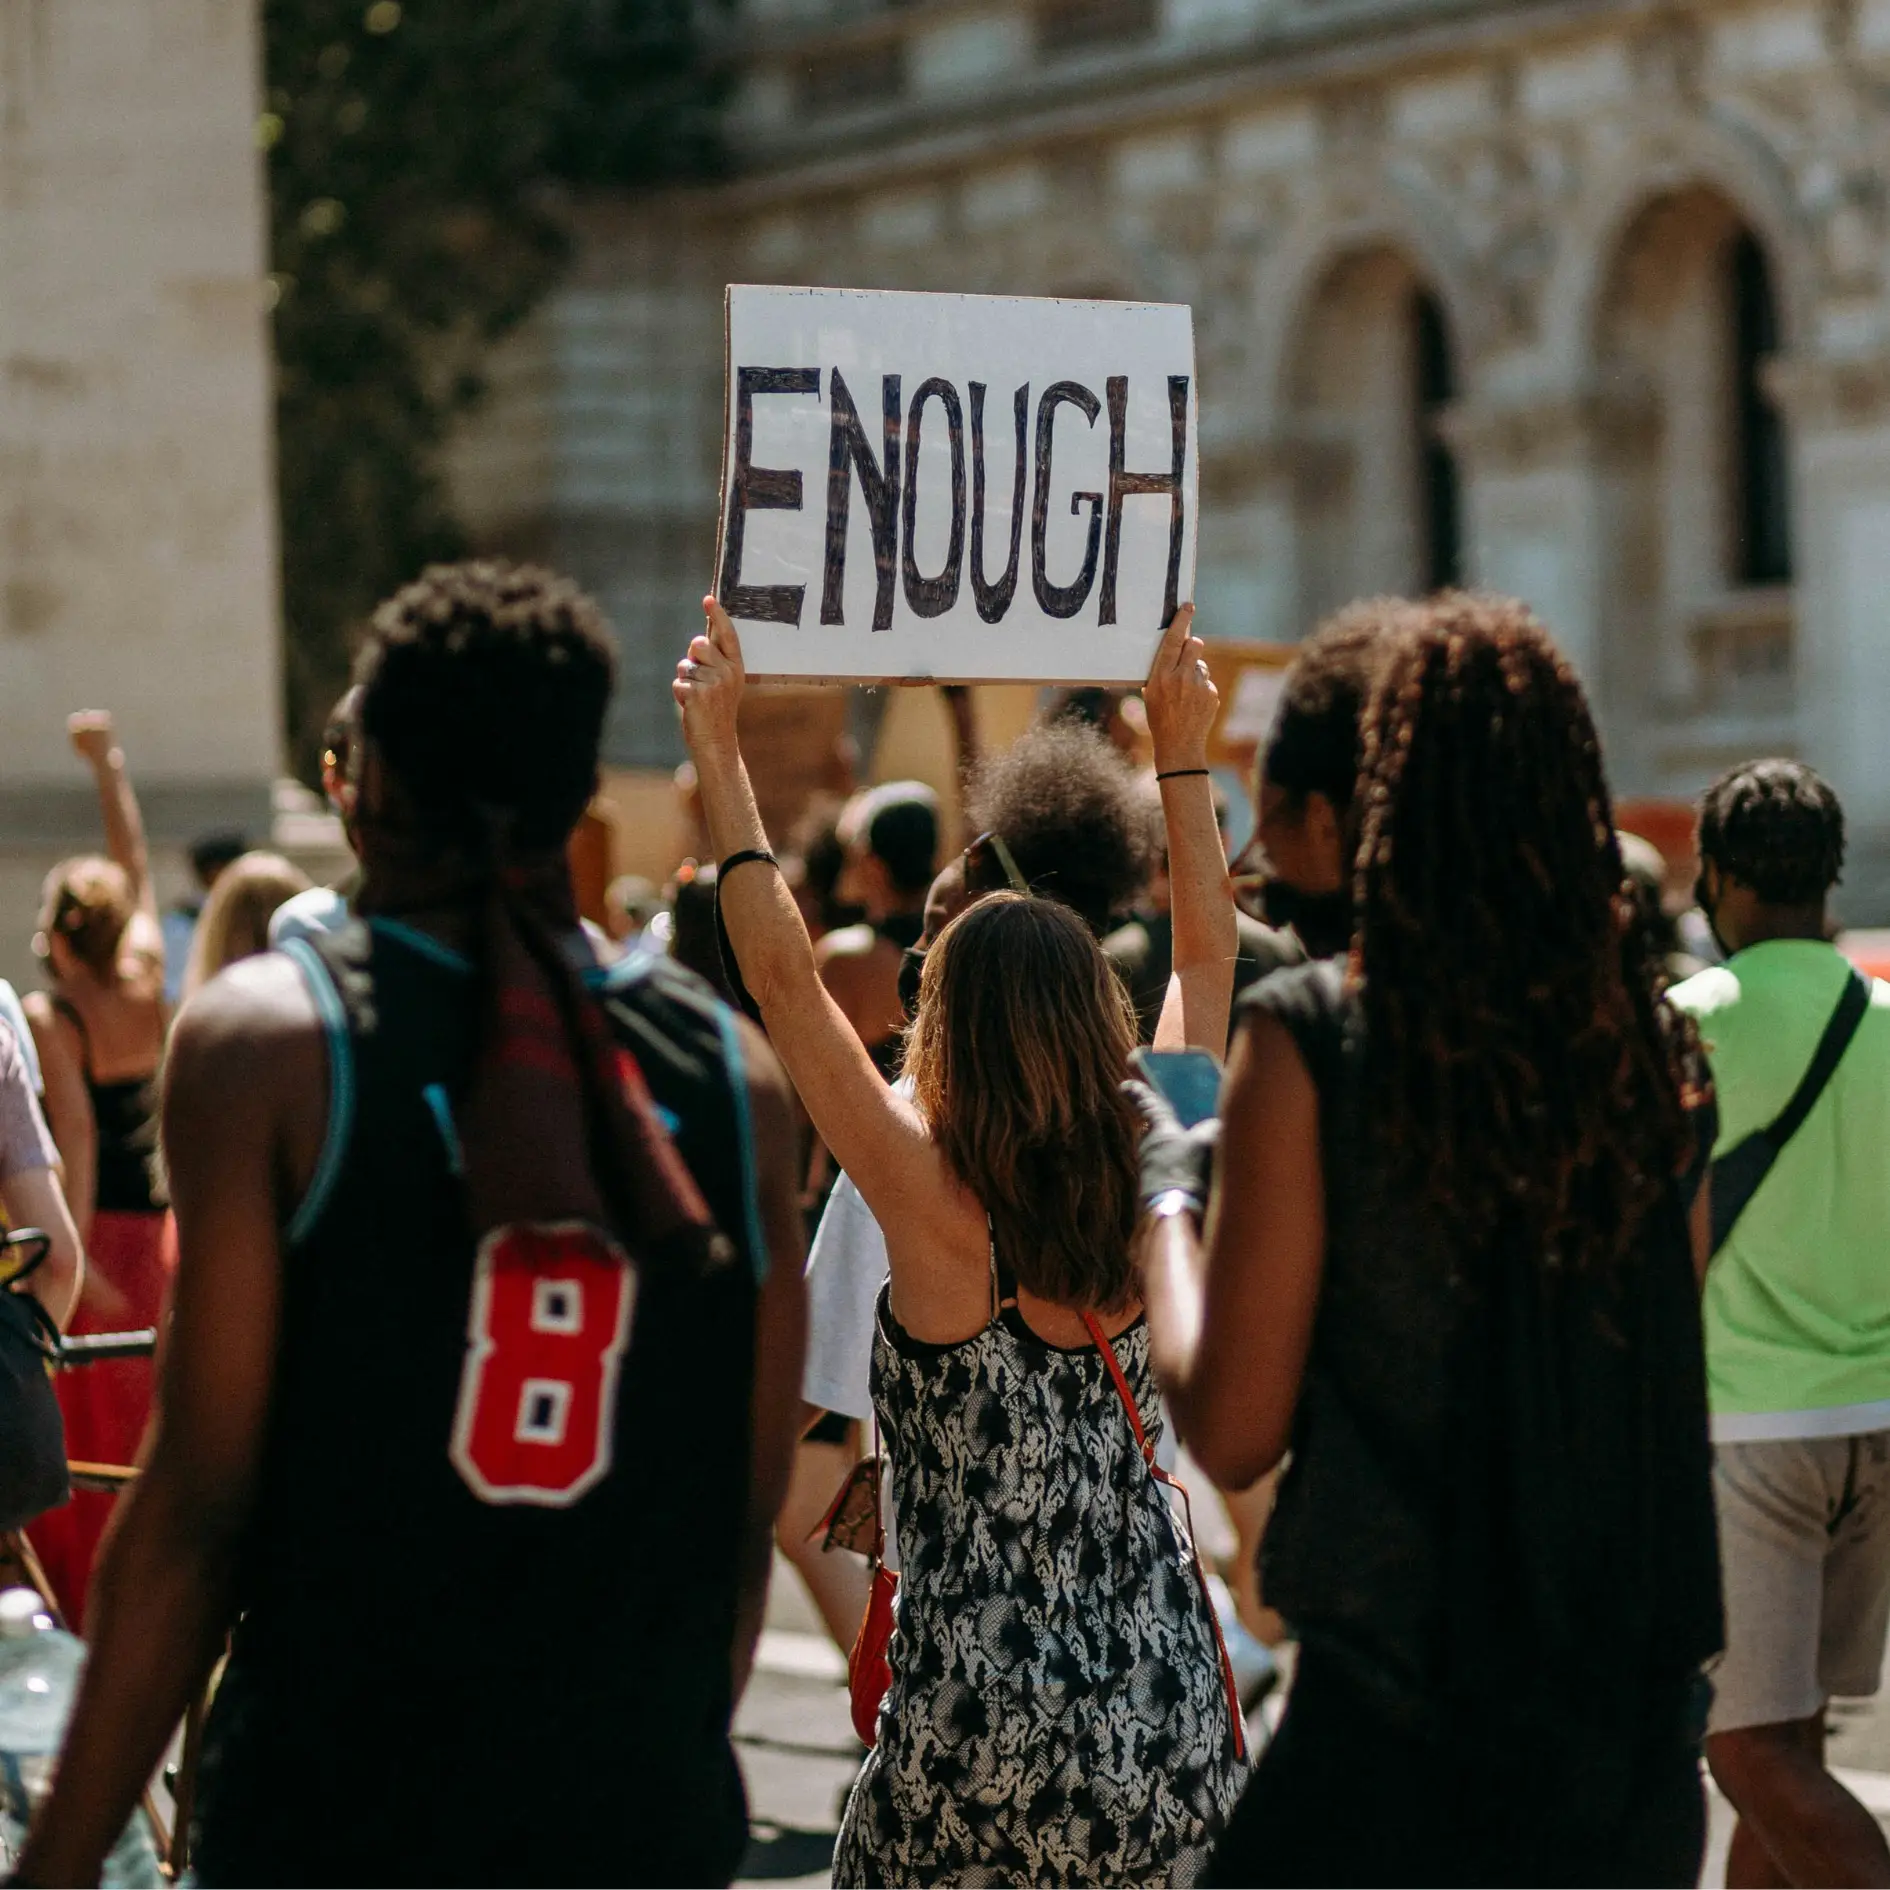 Photo of a group of young people carrying protest signs on a college campus